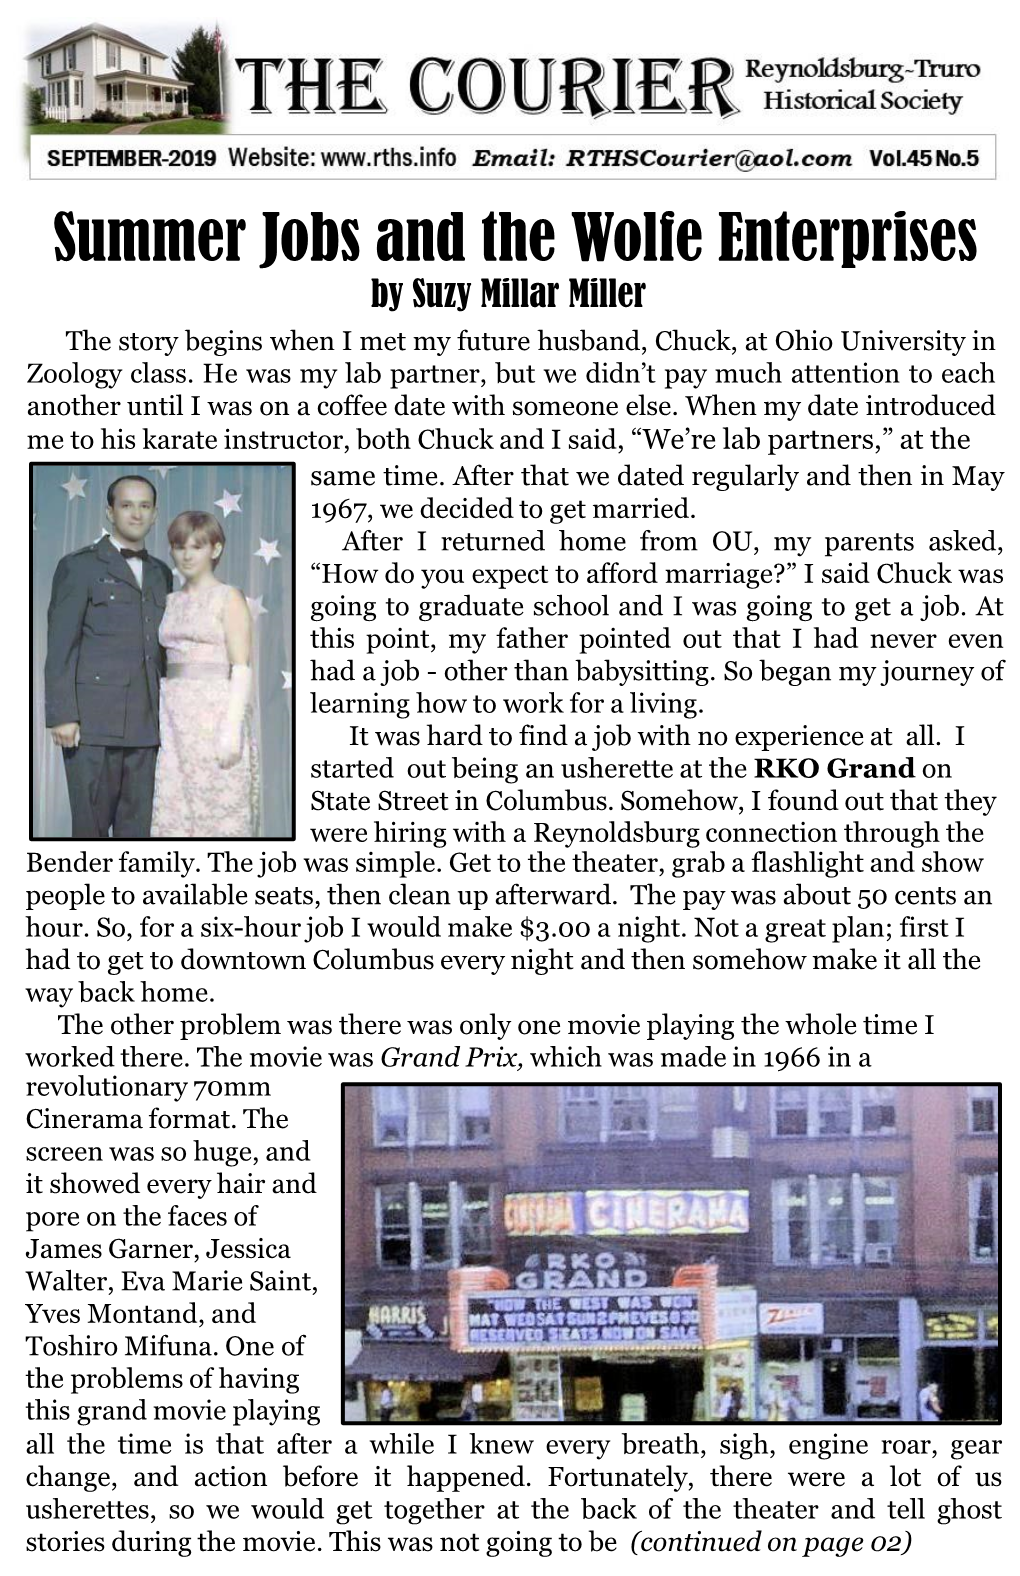 Summer Jobs and the Wolfe Enterprises by Suzy Millar Miller the Story Begins When I Met My Future Husband, Chuck, at Ohio University in Zoology Class